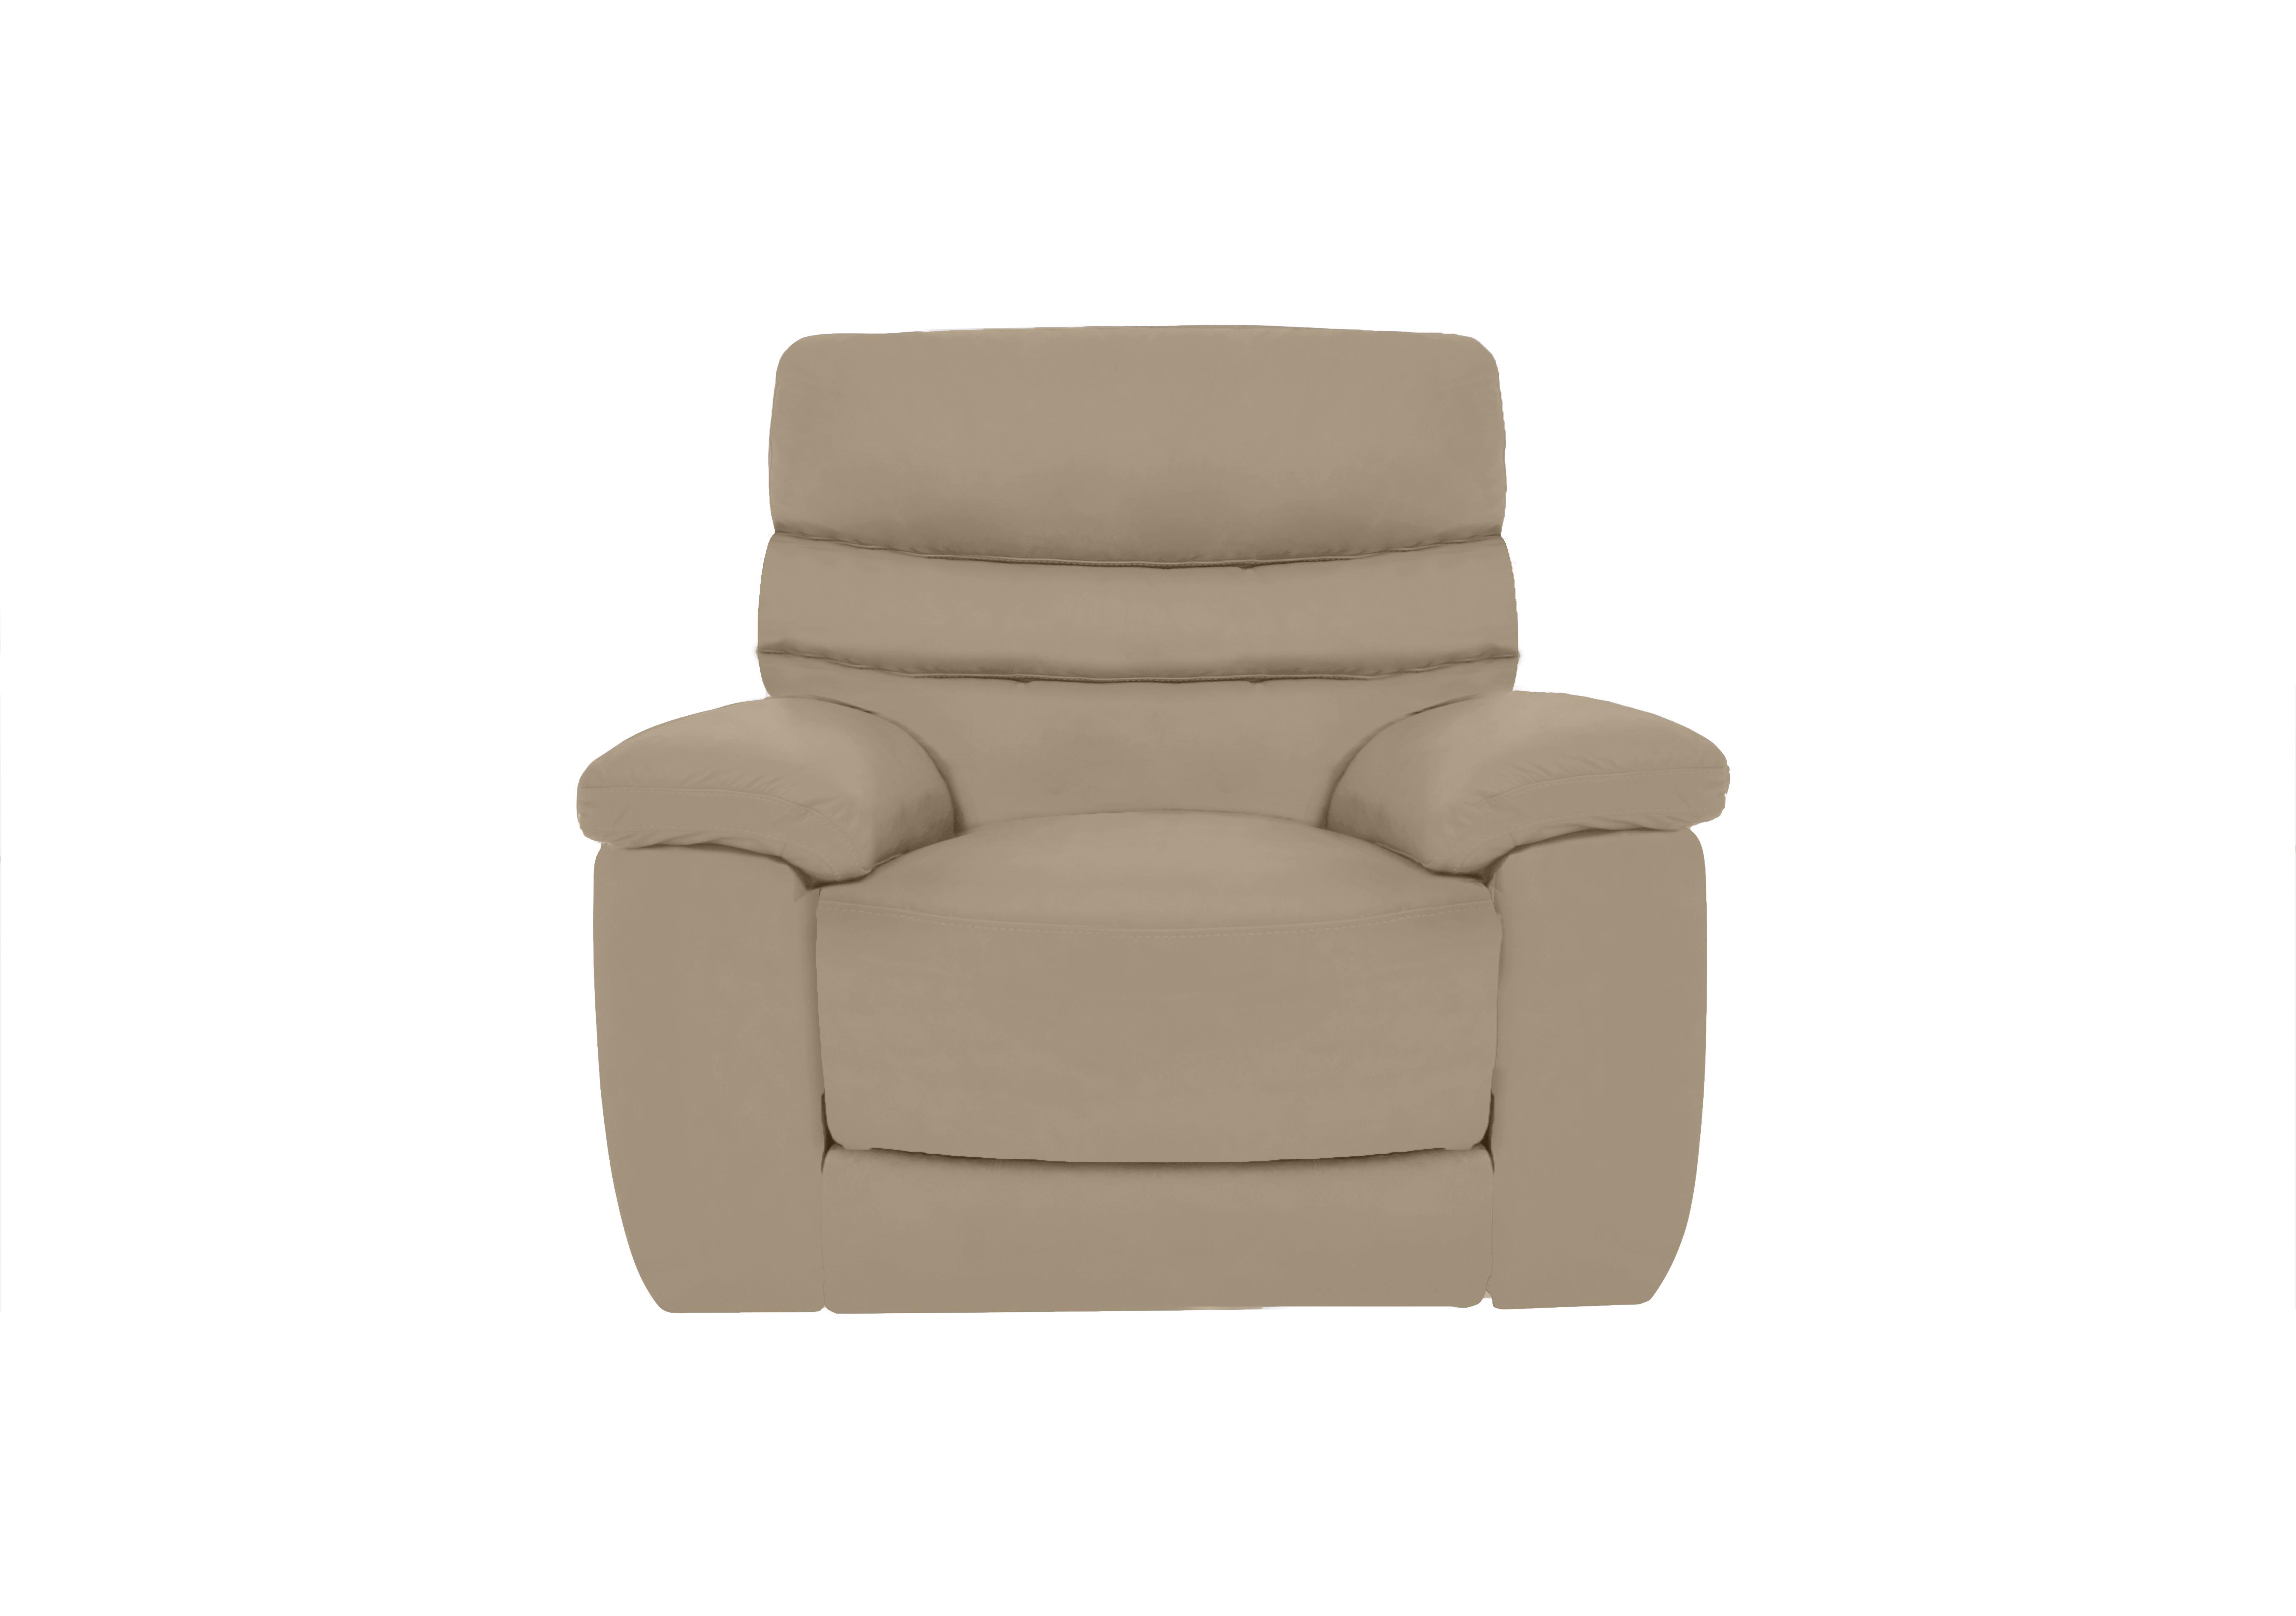 Nimbus Leather Chair in Bx-039c Pebble on Furniture Village